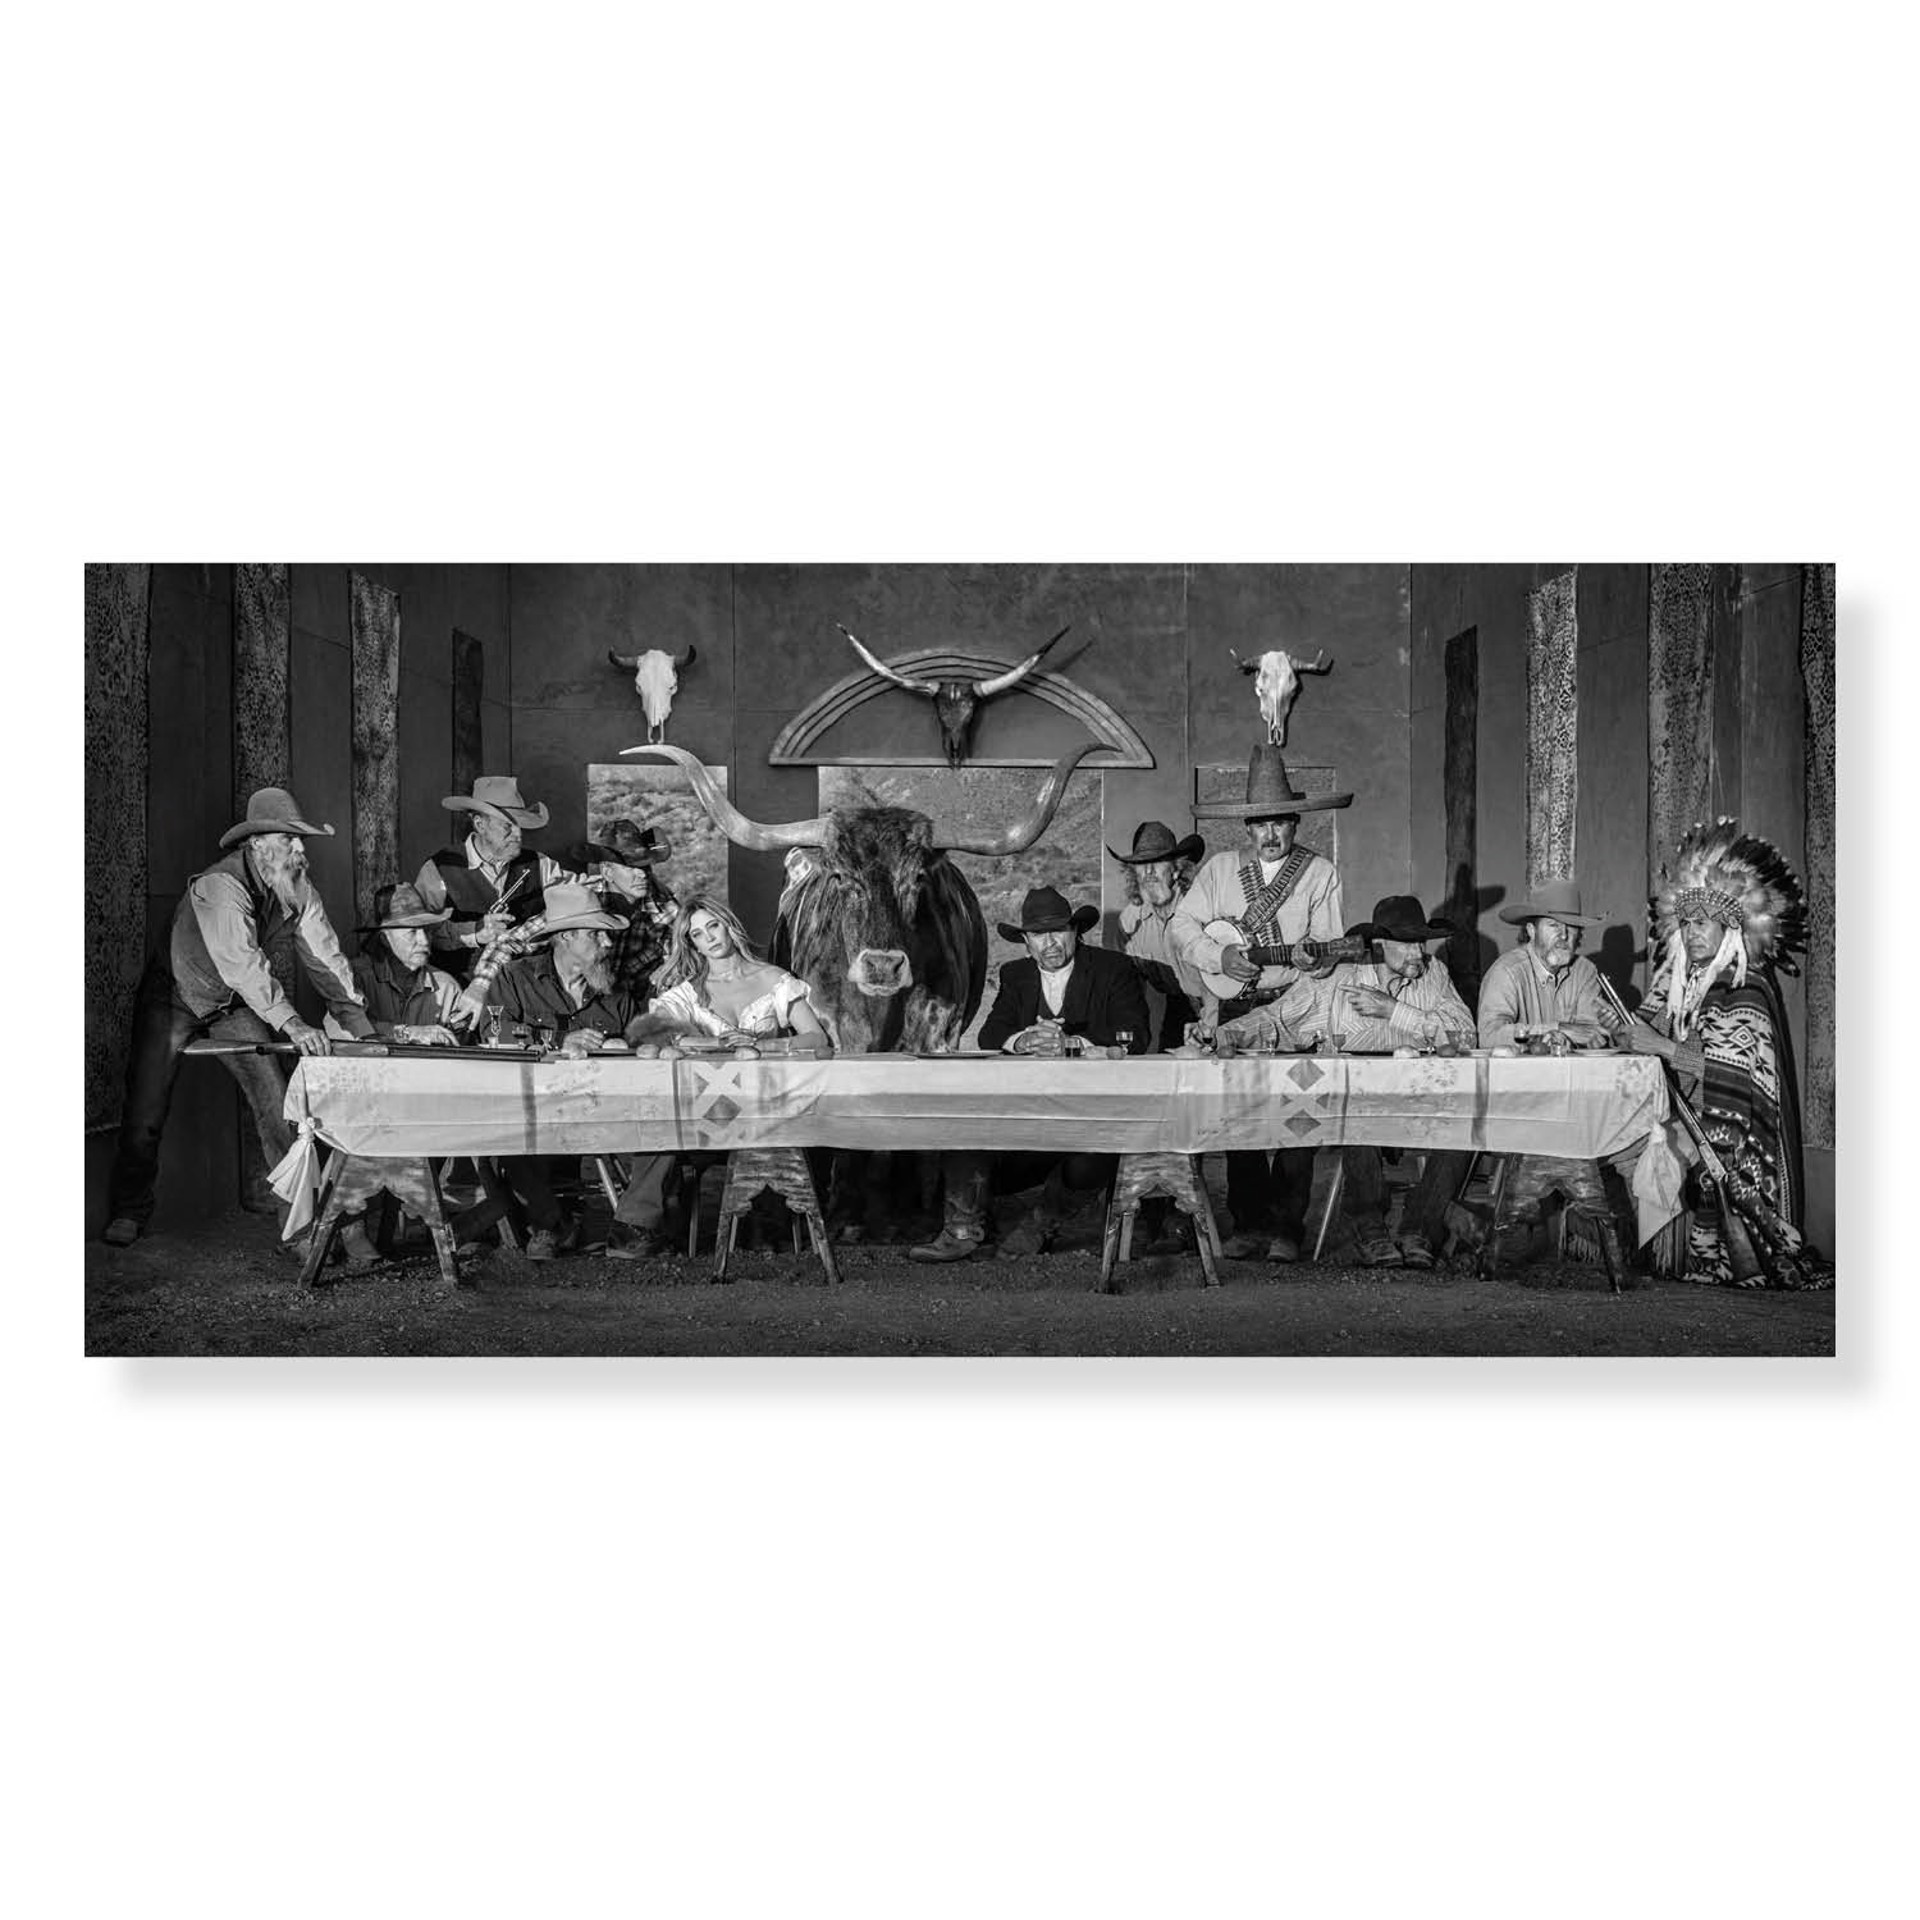 The Last Supper in Texas by David Yarrow